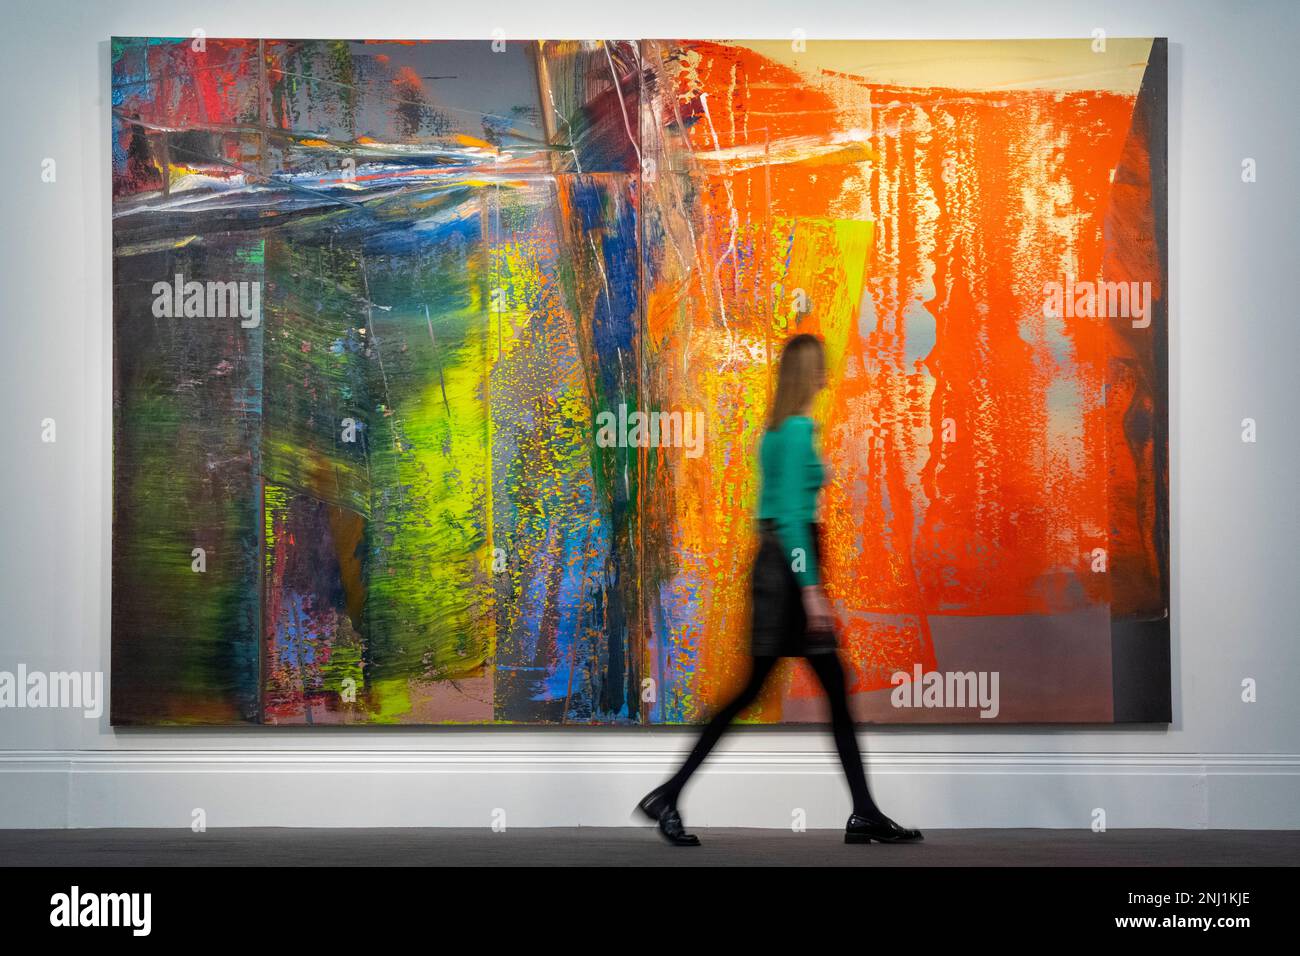 London, UK.  22 February 2023. A staff member passes 'Abstraktes Bild' by Gerhard Richter (Est. in the region of £37 million) at a preview of highlights from Sotheby’s upcoming Modern & Contemporary Evening sale featuring works by Kandinsky, Picasso, Richter and Munch.  The sale takes place at Sotheby’s New Bond Street galleries on 1 March 2023. Credit: Stephen Chung / Alamy Live News Stock Photo